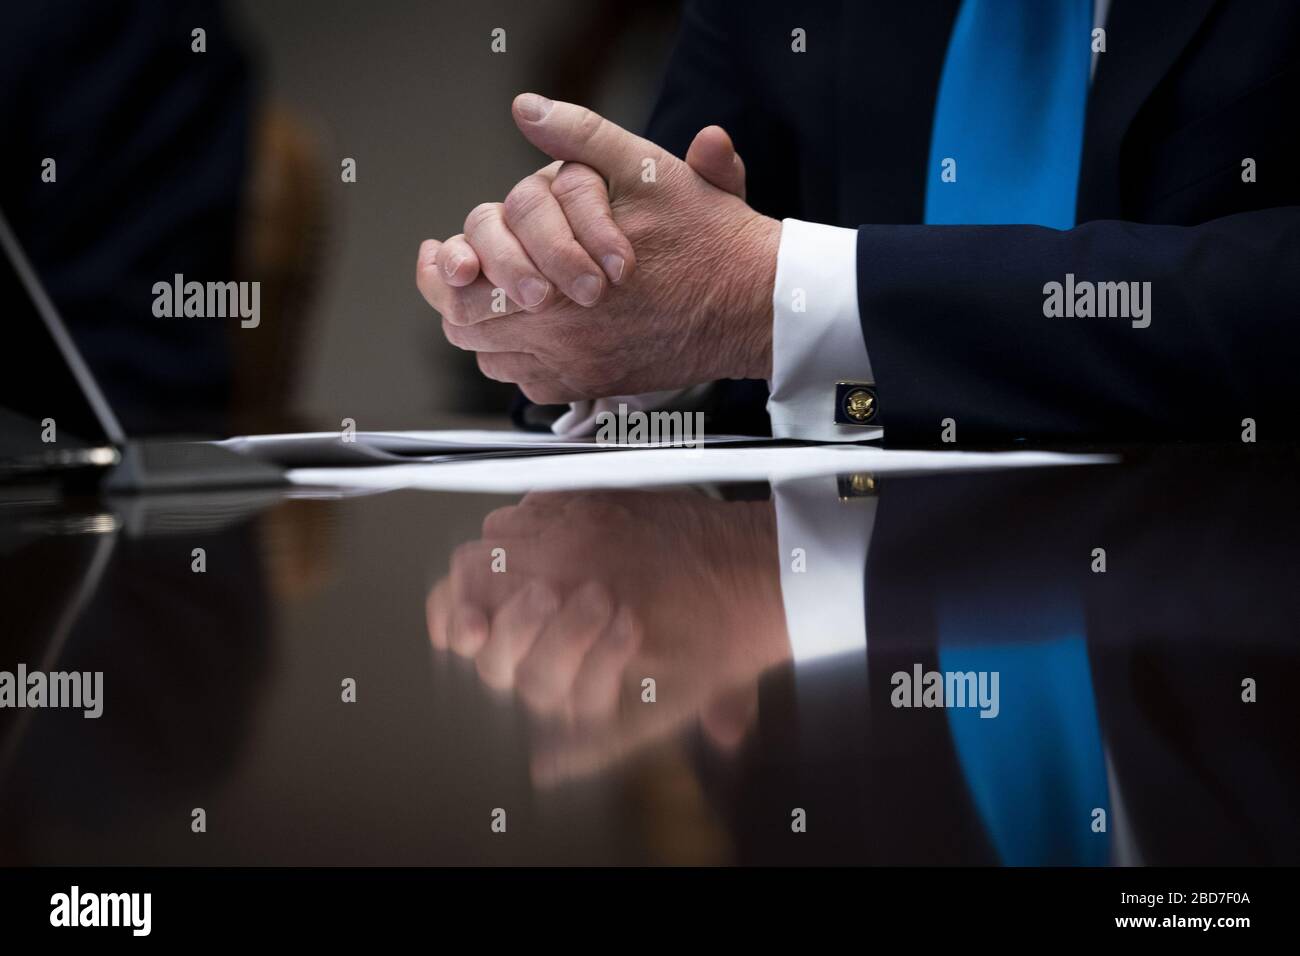 Washington, United States. 07th Apr, 2020. President Donald Trump's hands are seen as he makes remarks as he participates in a Small Business Relief Update at the White House on Tuesday, April 7, 2020 in Washington, DC President Donald Trump announced in March that companies affected by the coronavirus will be given $50 billion more in low-interest loans federally guaranteed by the Small Business Administration. Photo by Doug Mills/UPI Credit: UPI/Alamy Live News Stock Photo